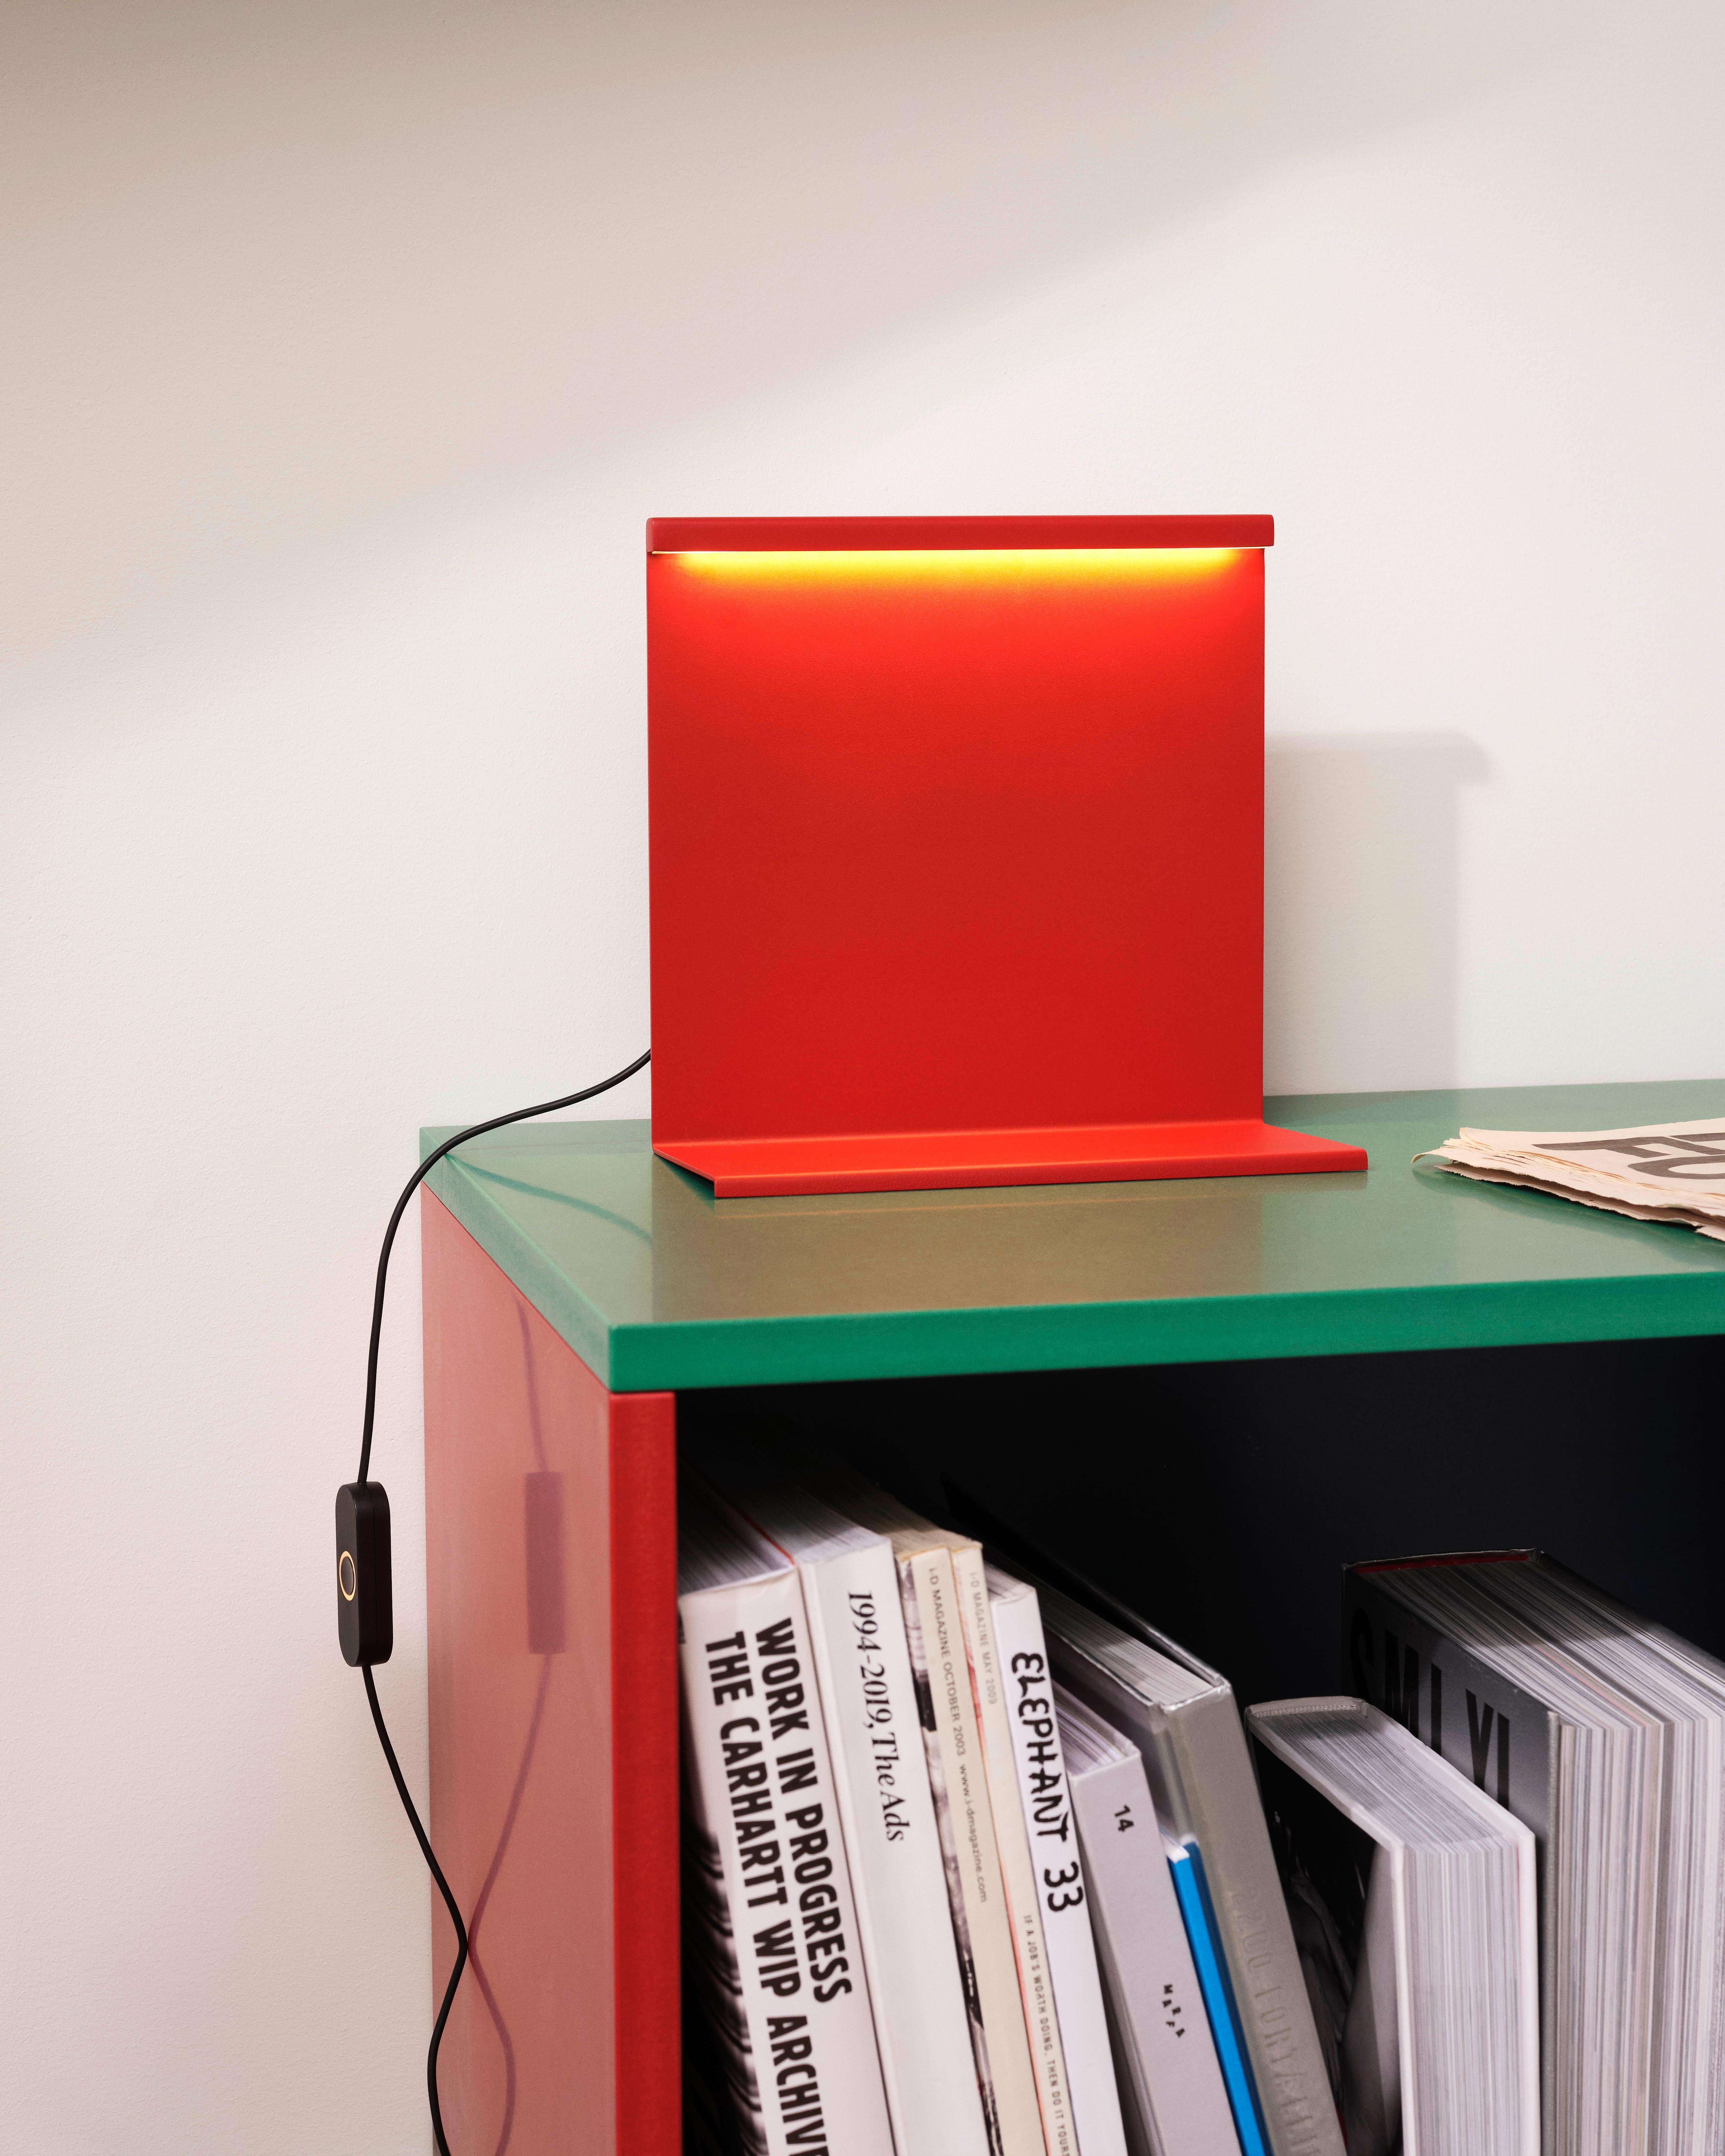 Inspired by the innovative architecture of fellow Mexican Luis Barragan, Moisés Hernández designed the LBM Table Lamp to reflect his fascination with monolithic geometry, color, light and shadows. Constructed from thin planes of vertical sheet